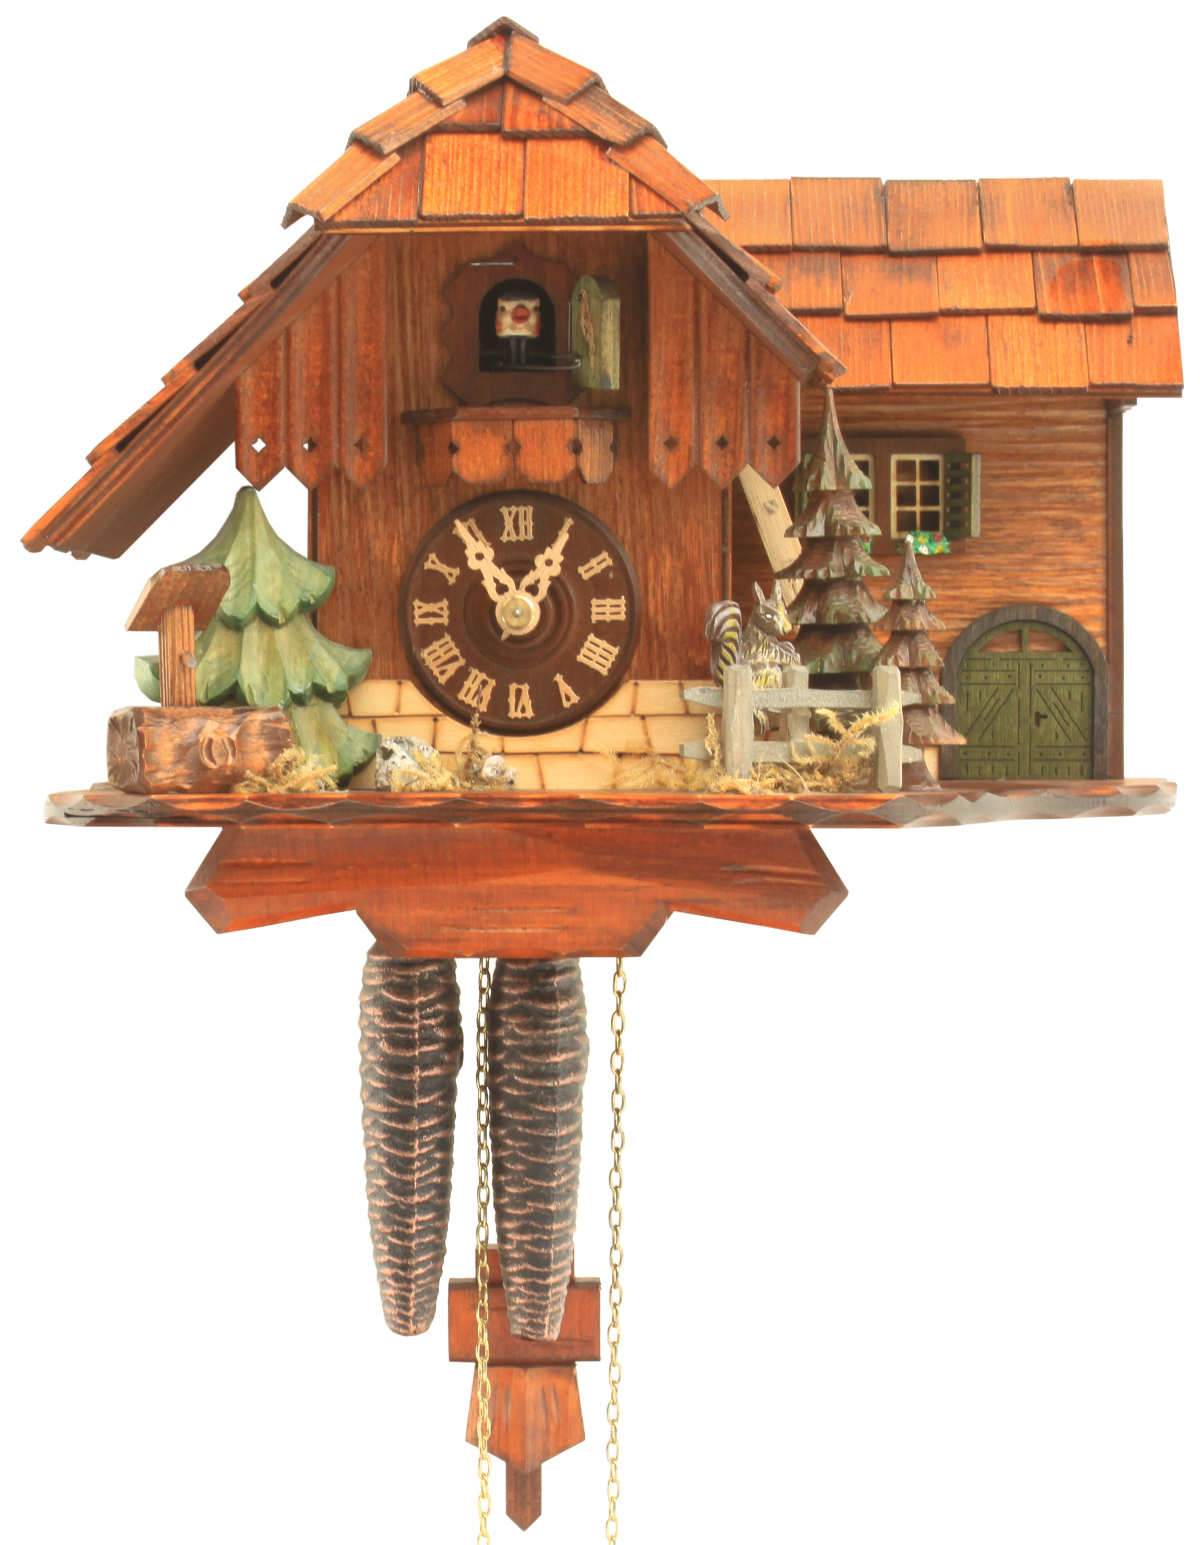 Cuckoo clock with moving squirrel